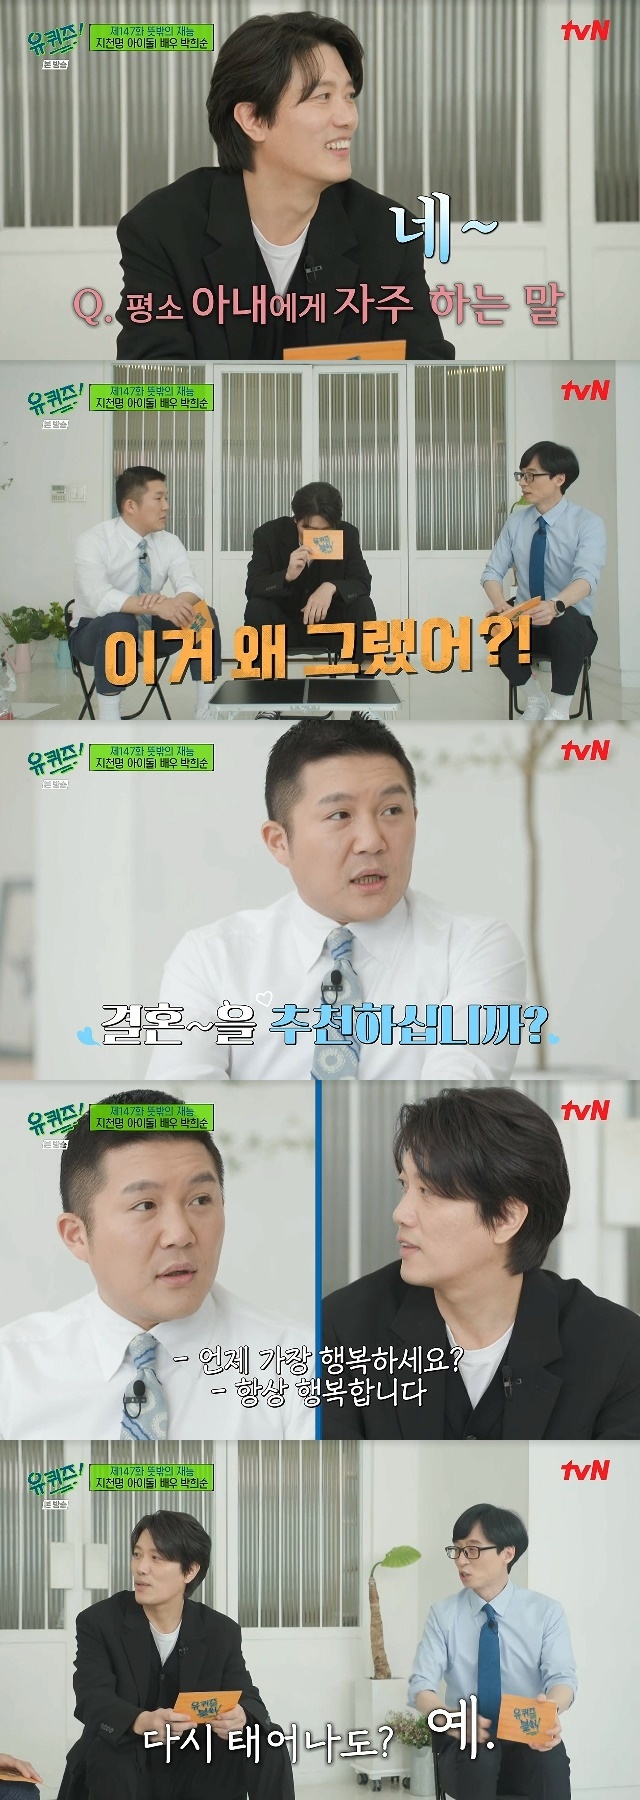 Actor Hee-soon Park has revealed his affection for wife Park Ye-jin.In the 147th episode of TVN You Quiz on the Block (hereinafter referred to as You Quiz on the Block), which was broadcast on March 30, Ji Chun-myeong idol actor Hee-soon Park appeared in the special feature of Unexpected Talent to meet his active talents in his field with his extraordinary talents.Hee-soon Park said in the past, Melo will only take with his wife Yejin. What was the question about that? What kind of person would you like to do with melodrama?I did not even come in, but I was talking a little, so I just joked Ill do it with Park Ye-jin. I told him not to go out and talk about himself, and why do you keep talking about me when you go out to promote your movie?When asked if he would do it if the melodrama came in now, Hee-soon Park replied: Yes, if the melodrama comes in, I will do it; I will have to be screened instead.Hee-soon Park had been married for a while but still called his wife Park Ye-jin saying, What am I doing now?Hee-soon Park responded to Yoo Jae-Suk, who teased about it, saying, So does Mr. Jae-seok.As they are actors, they will follow the broadcast or movie.I saw Nimah, do not cross the river when they were playing with me, and my grandmother and grandfather love were so beautiful.I followed it and became a honorific word, and if he says honorific words, I will do it and if he says half words, I will do half words. These Hee-soon Parks stopped coffee of Park Ye-jin because he told him to stop drinking, smoking, or coffee.Hee-soon Park said, Is not it wise? Nussre, Yoo Jae-Suk said, Mr. Yejin should have taken the coffee.Hee-soon Park confessed to his wife that he often said to his wife, Yes, and often said, Why did you do this?Hee-soon Park said he would recommend to the question of whether he would recommend marriage, always to ask when he was happy, and he would marry Park Ye-jin even if he was born again.Its not a specific moment, its every moment, its comforting just that I have my side to lean on.I thought I was married at 45, and I thought it was this woman or not, talking to her when I wanted to talk, talking to her about the small things on the set.If you think you have ruined it, you will tell me it is different again. 